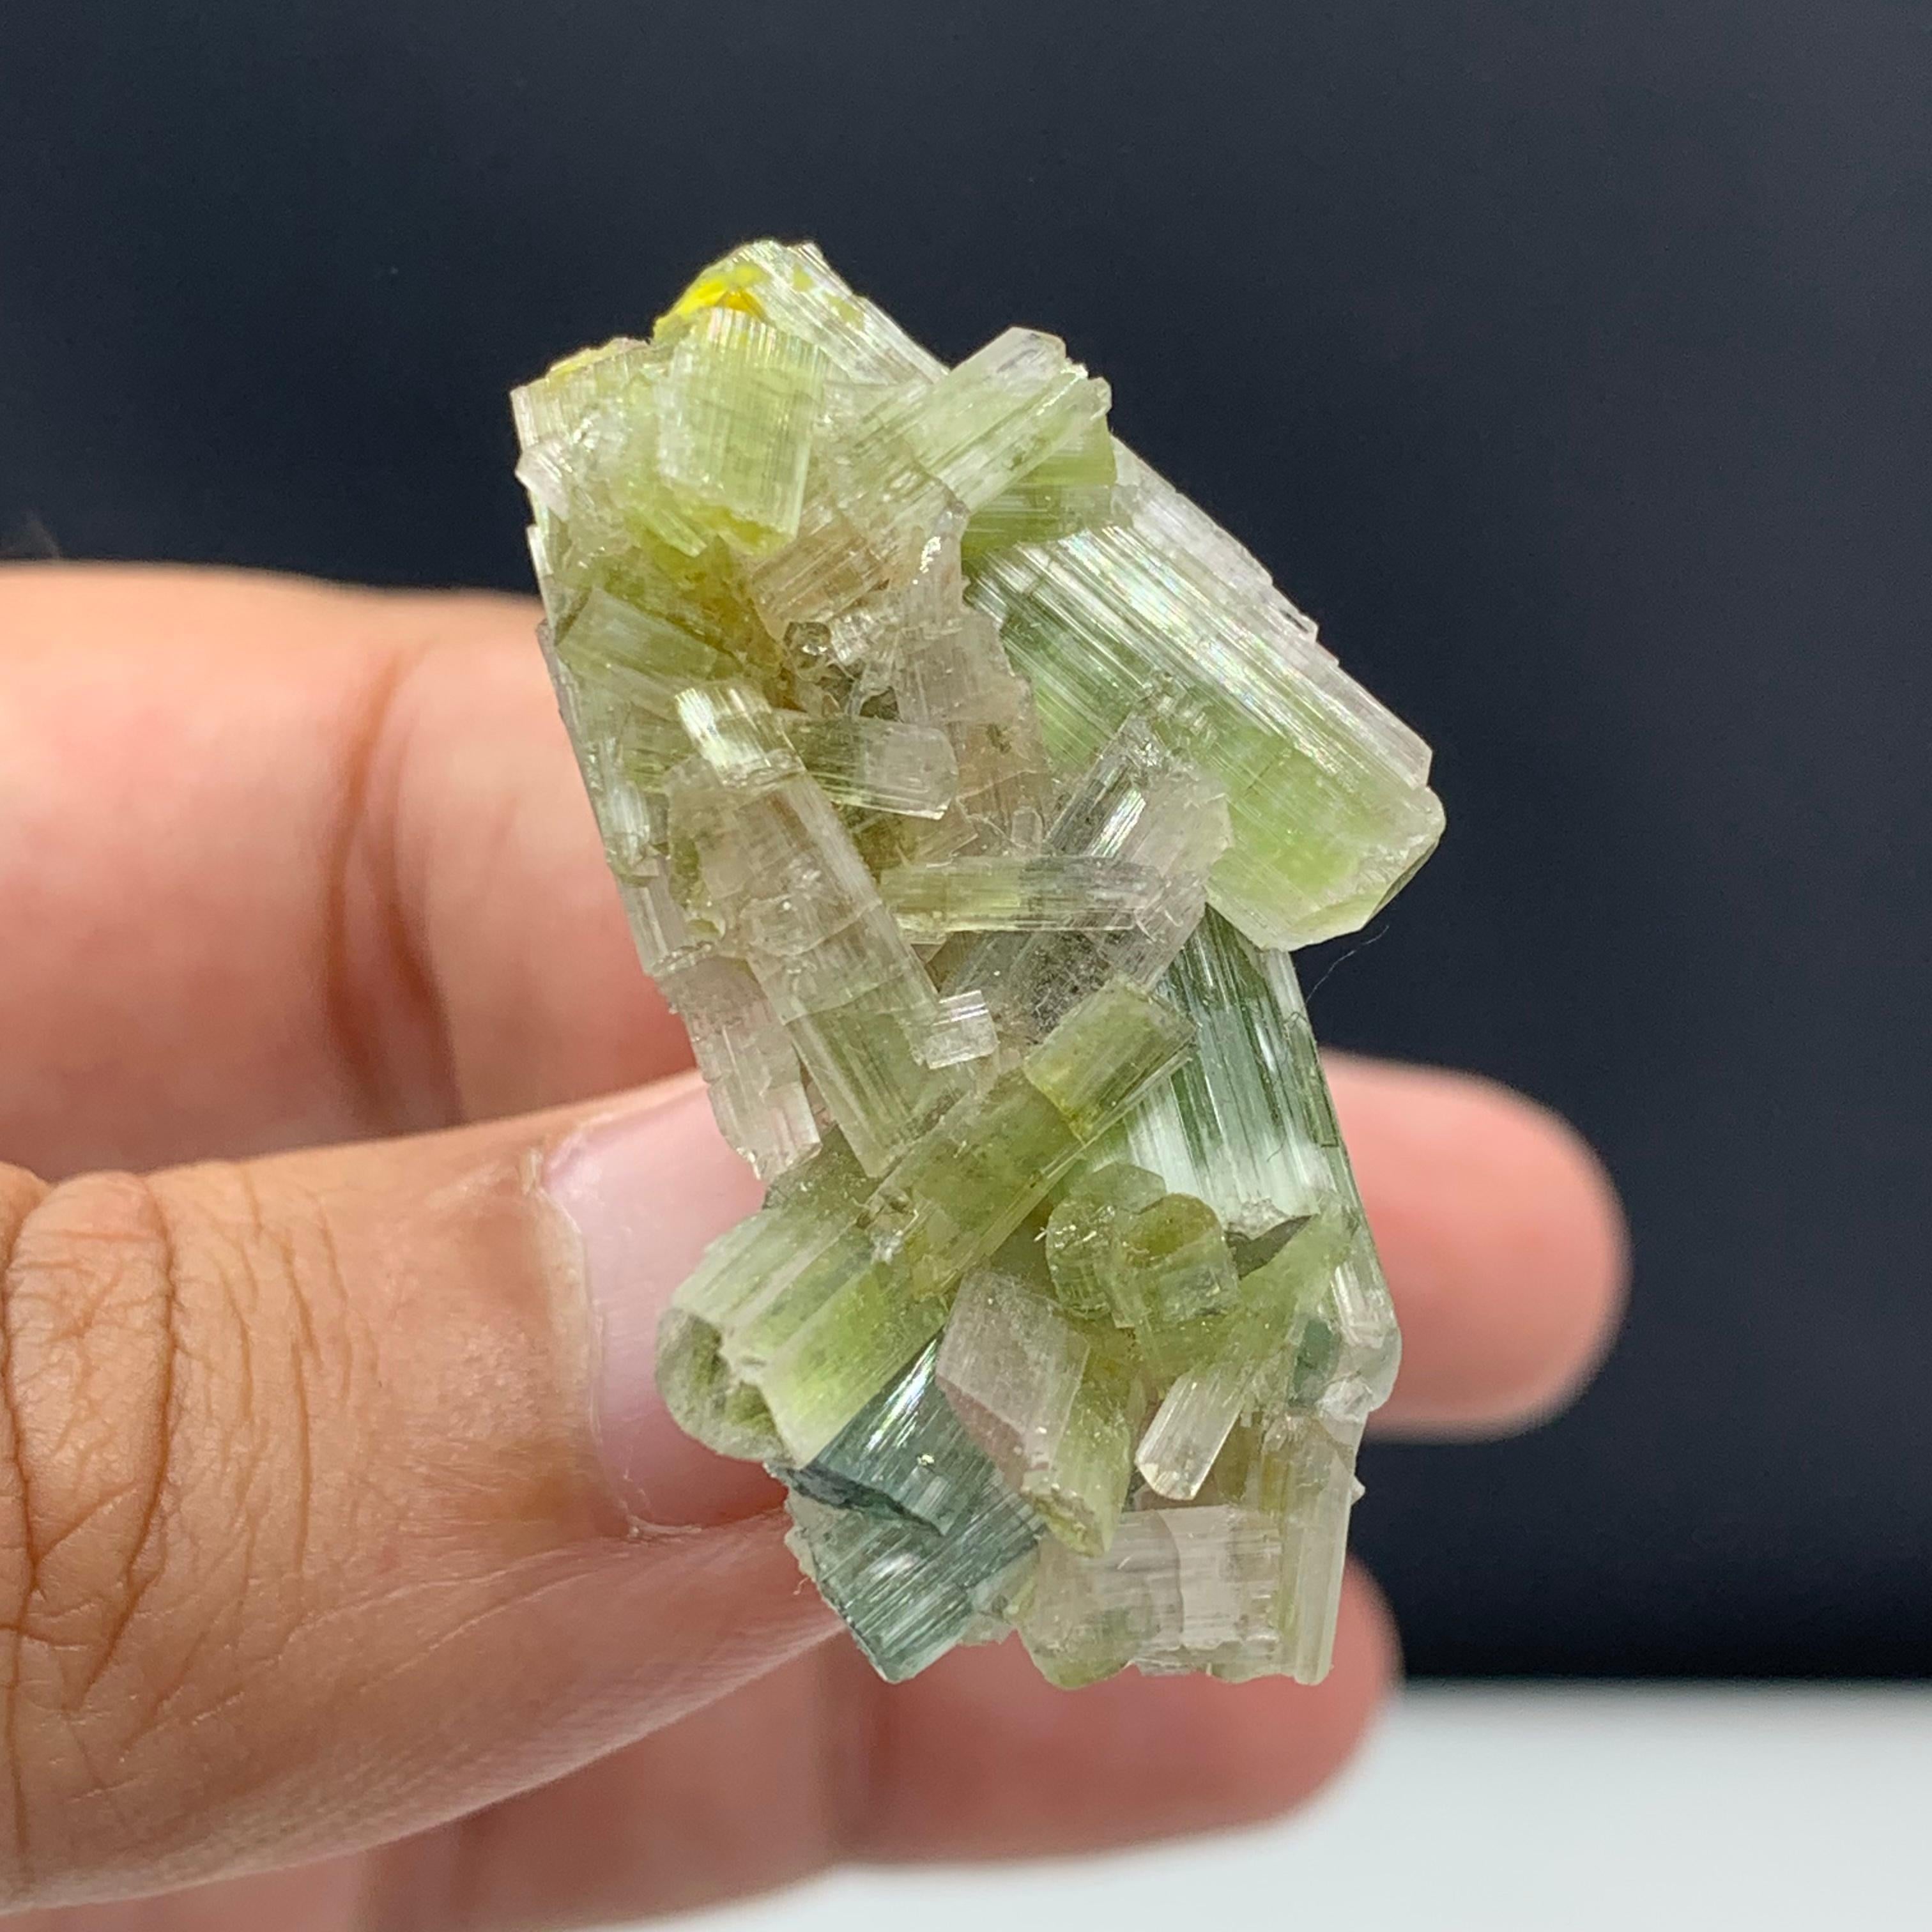 60.05 Carat Glamorous Tourmaline Crystals Cluster From Afghanistan 
Weight: 60.05 Carat 
Dimension: 4.1 x 2.2 x 10.4 Cm 
Origin: Afghanistan 

Tourmaline is a crystalline silicate mineral group in which boron is compounded with elements such as